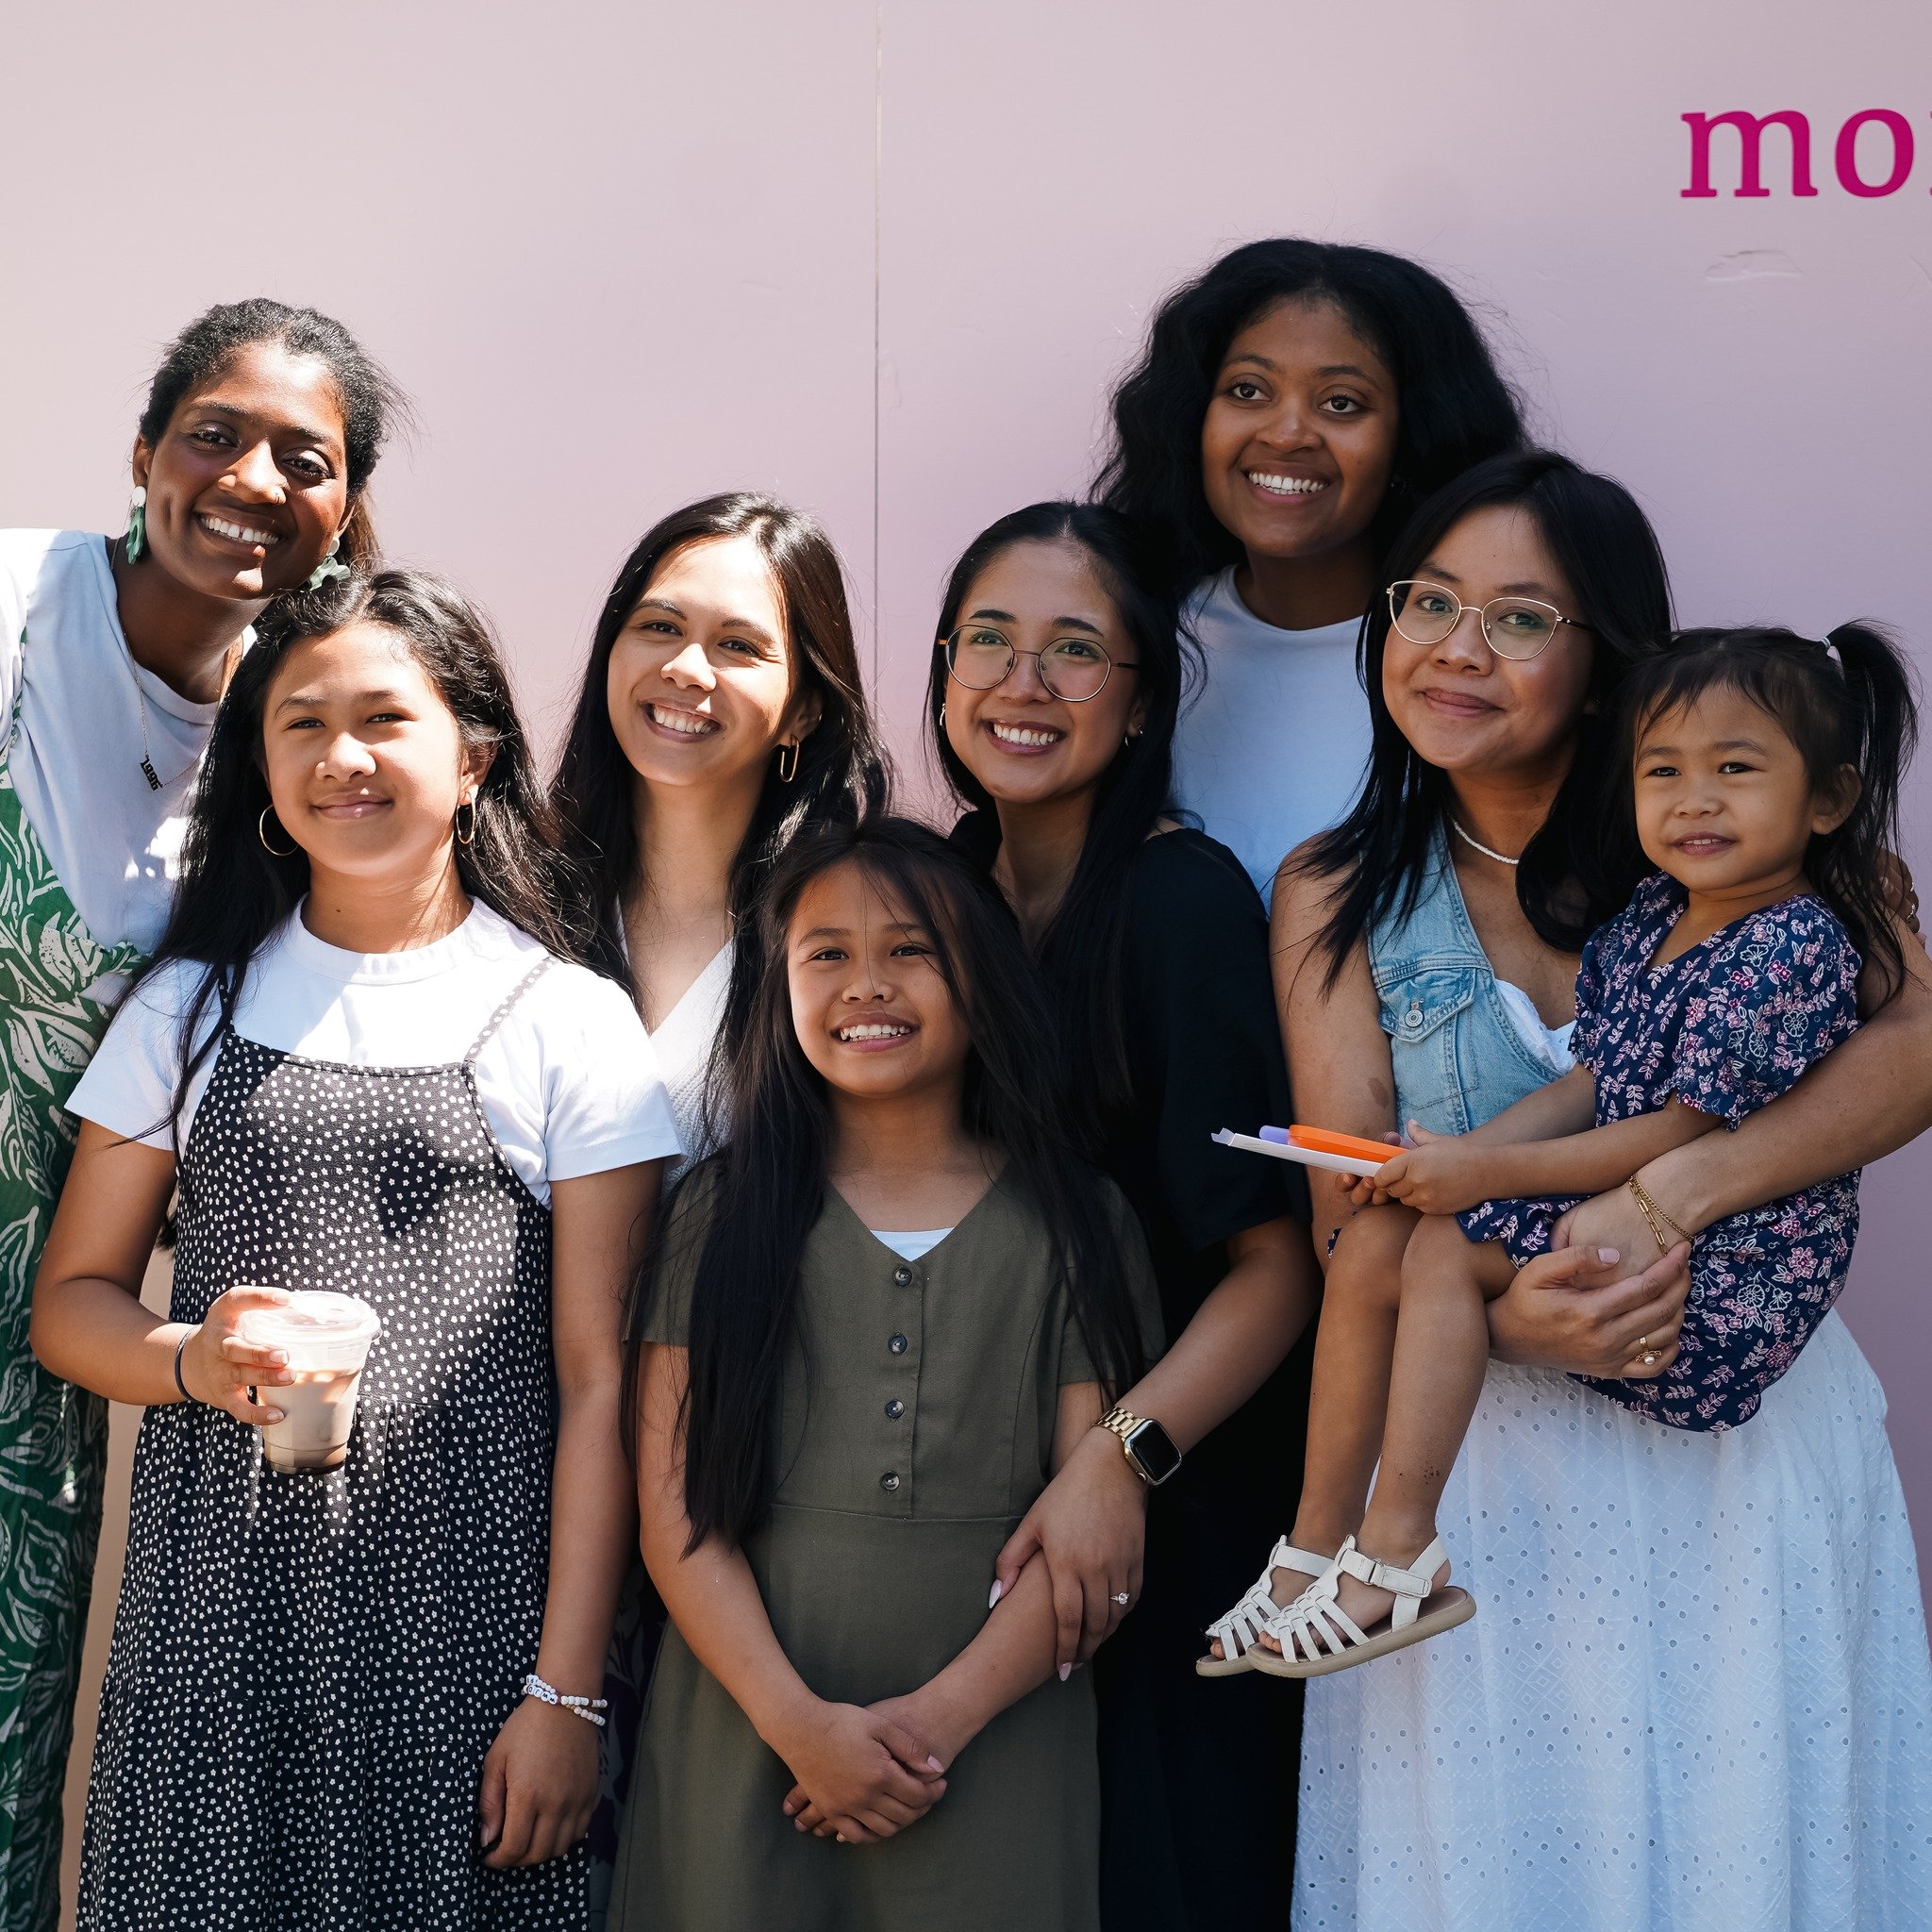 SUNDAY RECAP // May 12 (Mother's Day)

We had an awesome time celebrating our mothers this past Sunday. We are so thankful for what moms do for us.